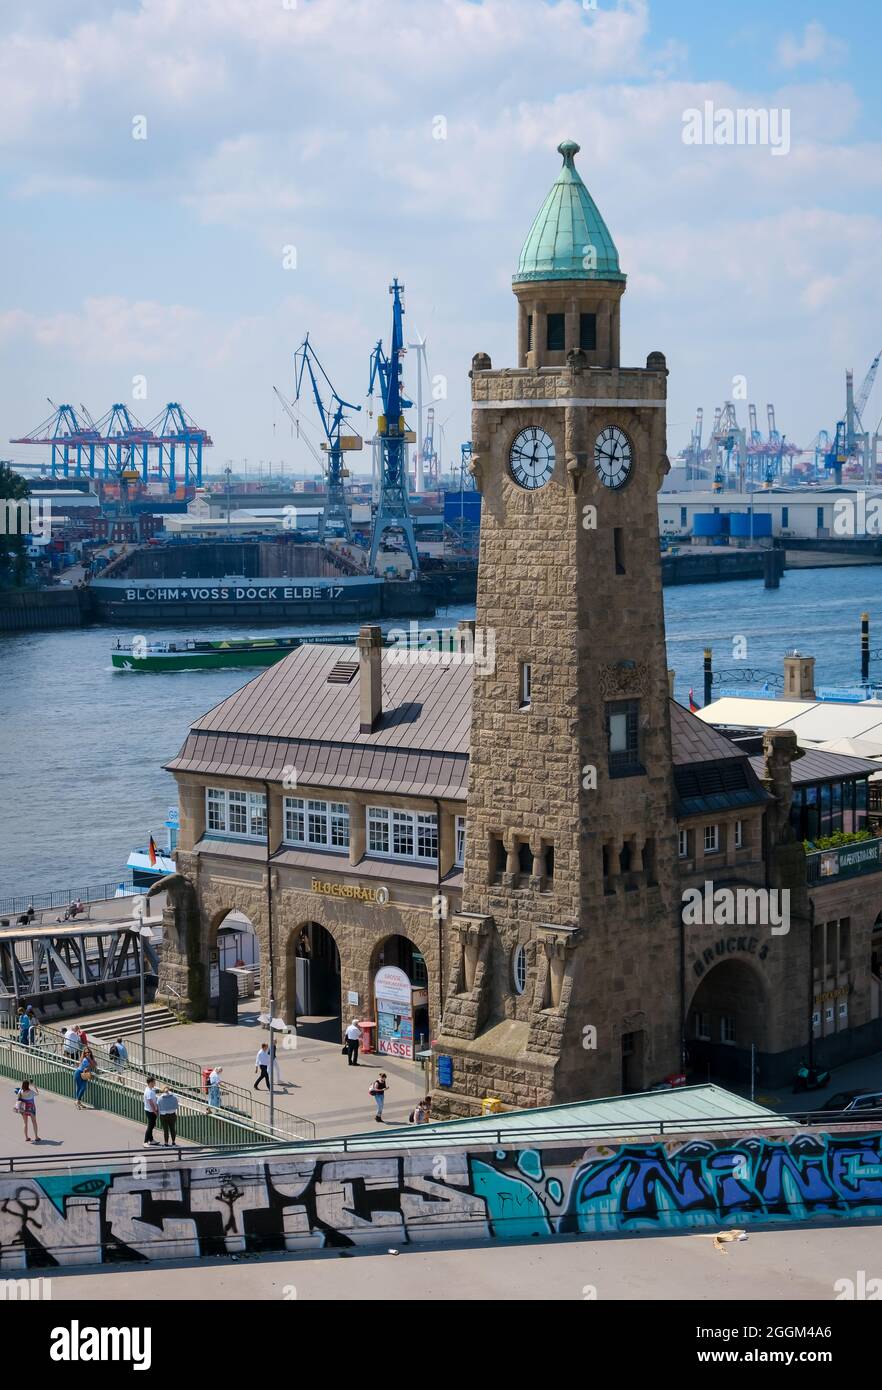 Hamburg, Germany - city view of the port of Hamburg, Landungsbruecken, level tower, the dome of the old Elbe tunnel. Stock Photo